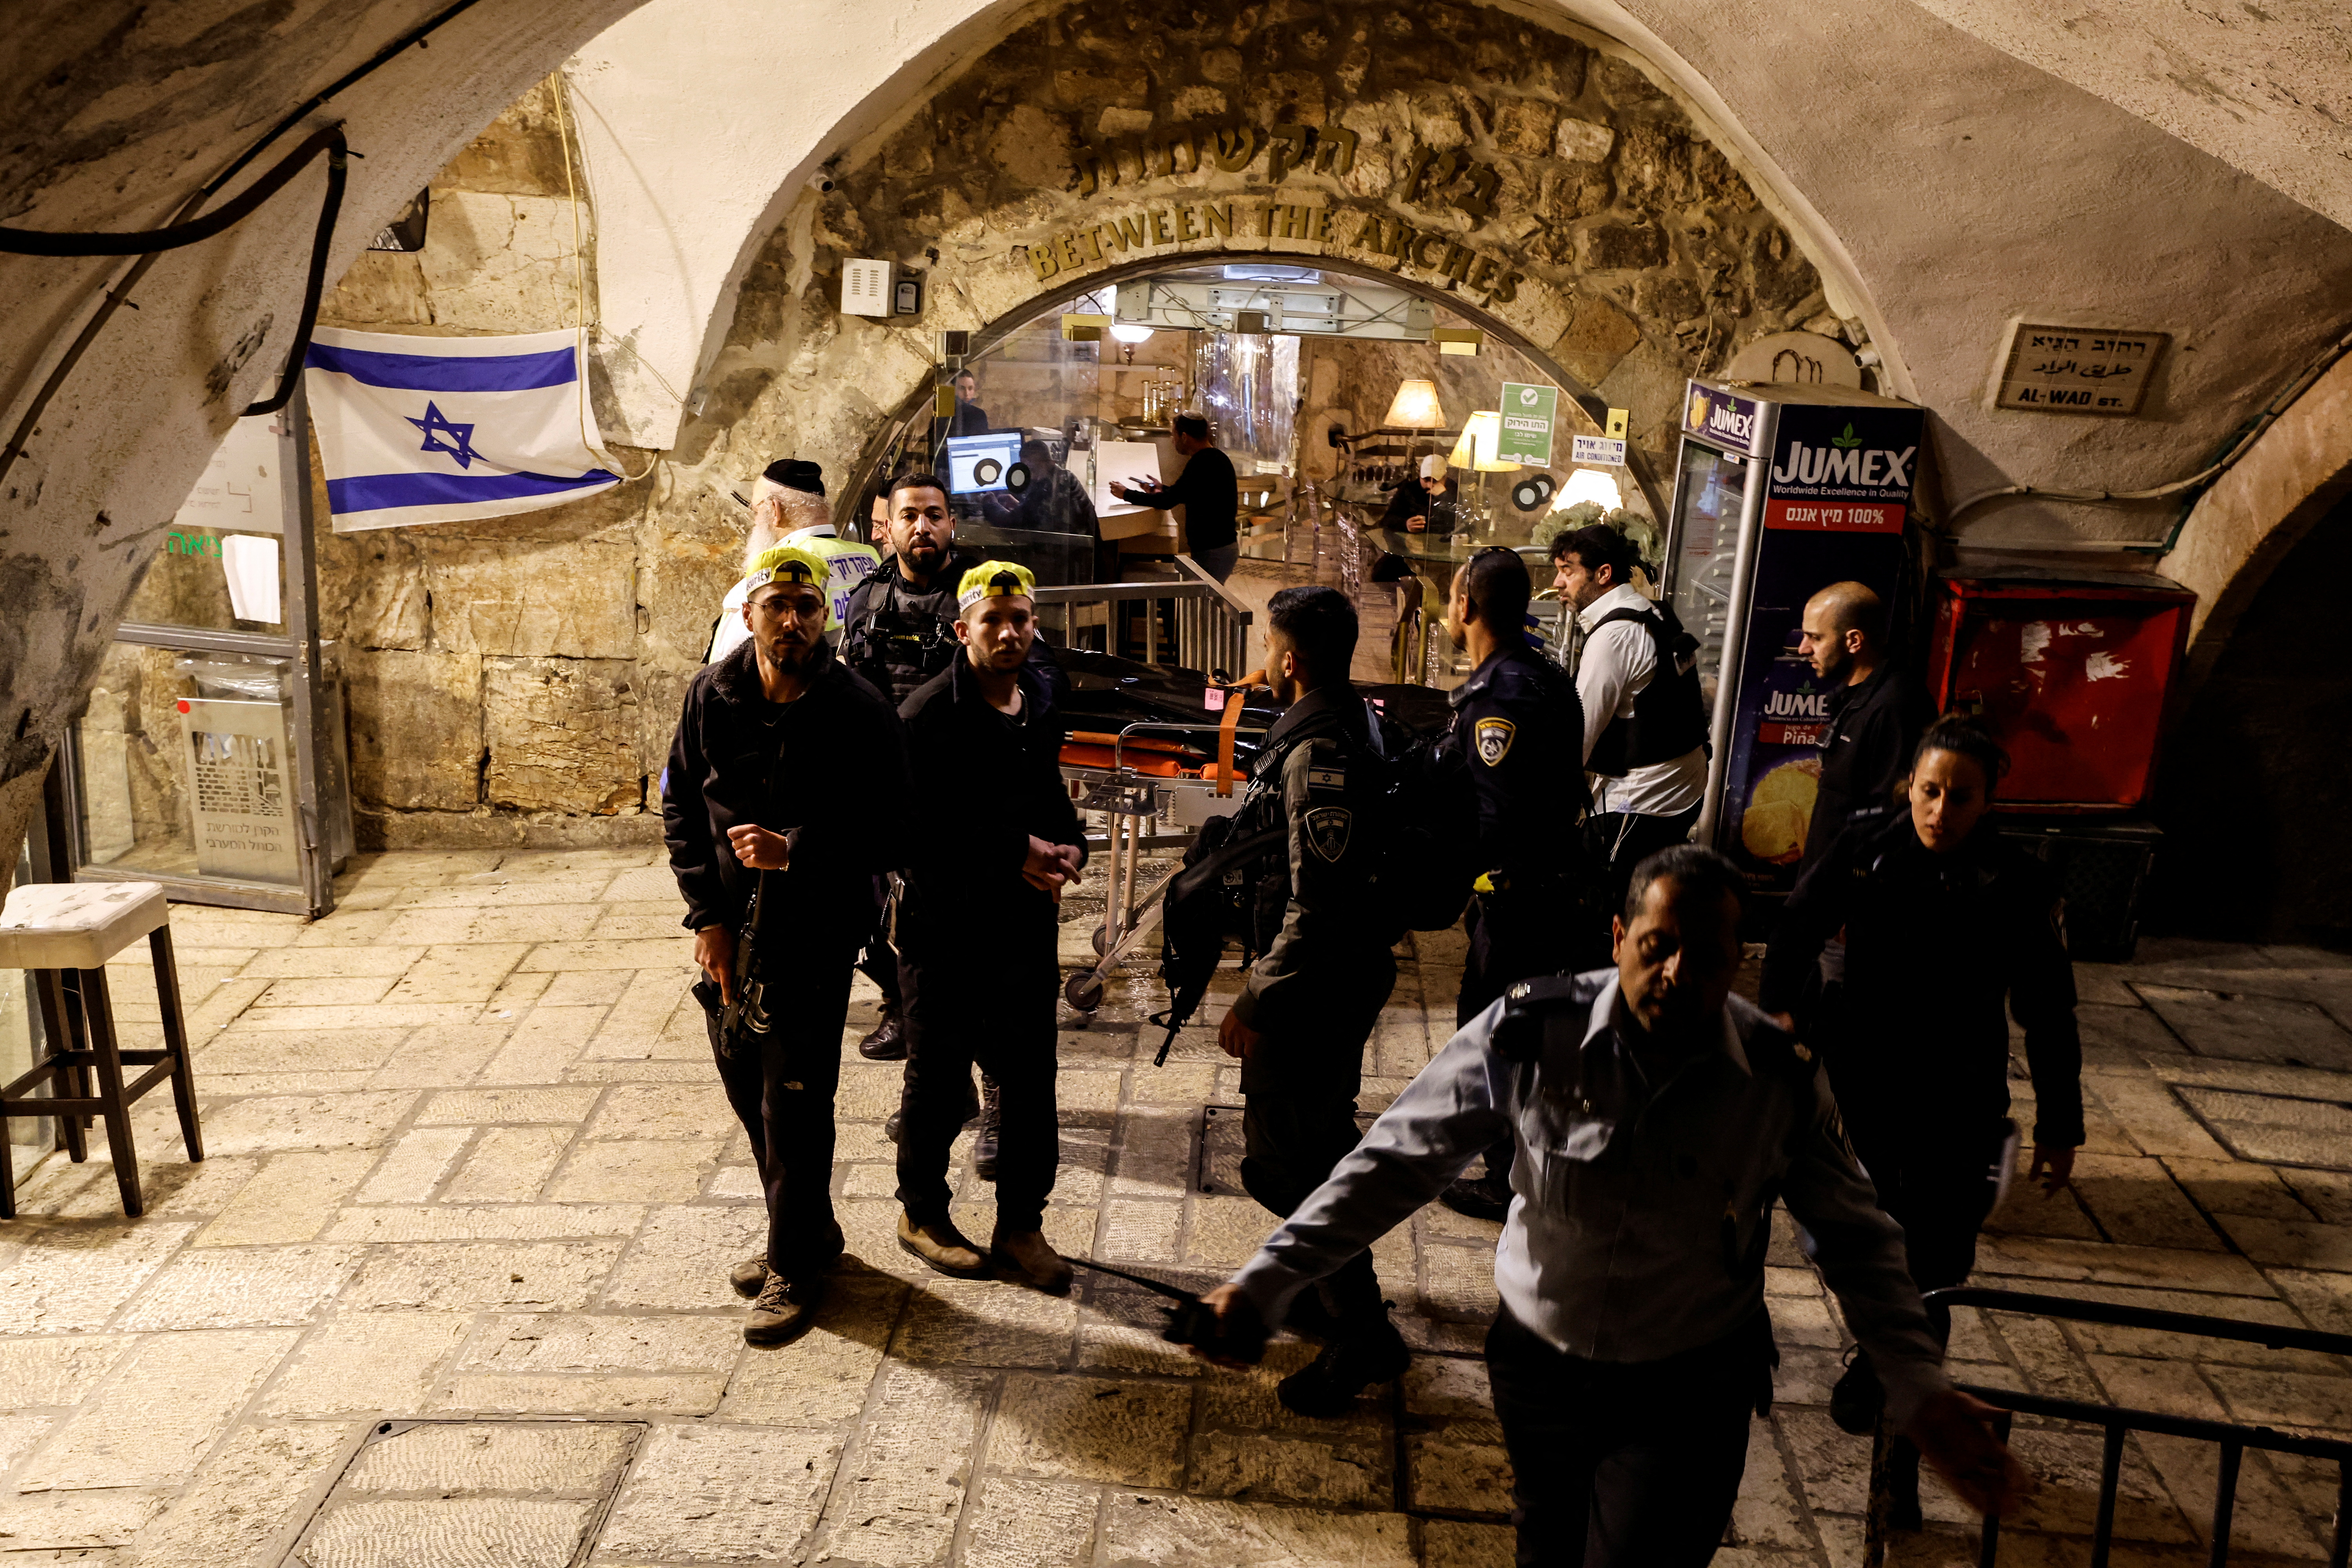 Israeli rescue workers carry a dead body at the scene following an incident inside Jerusalem's Old city